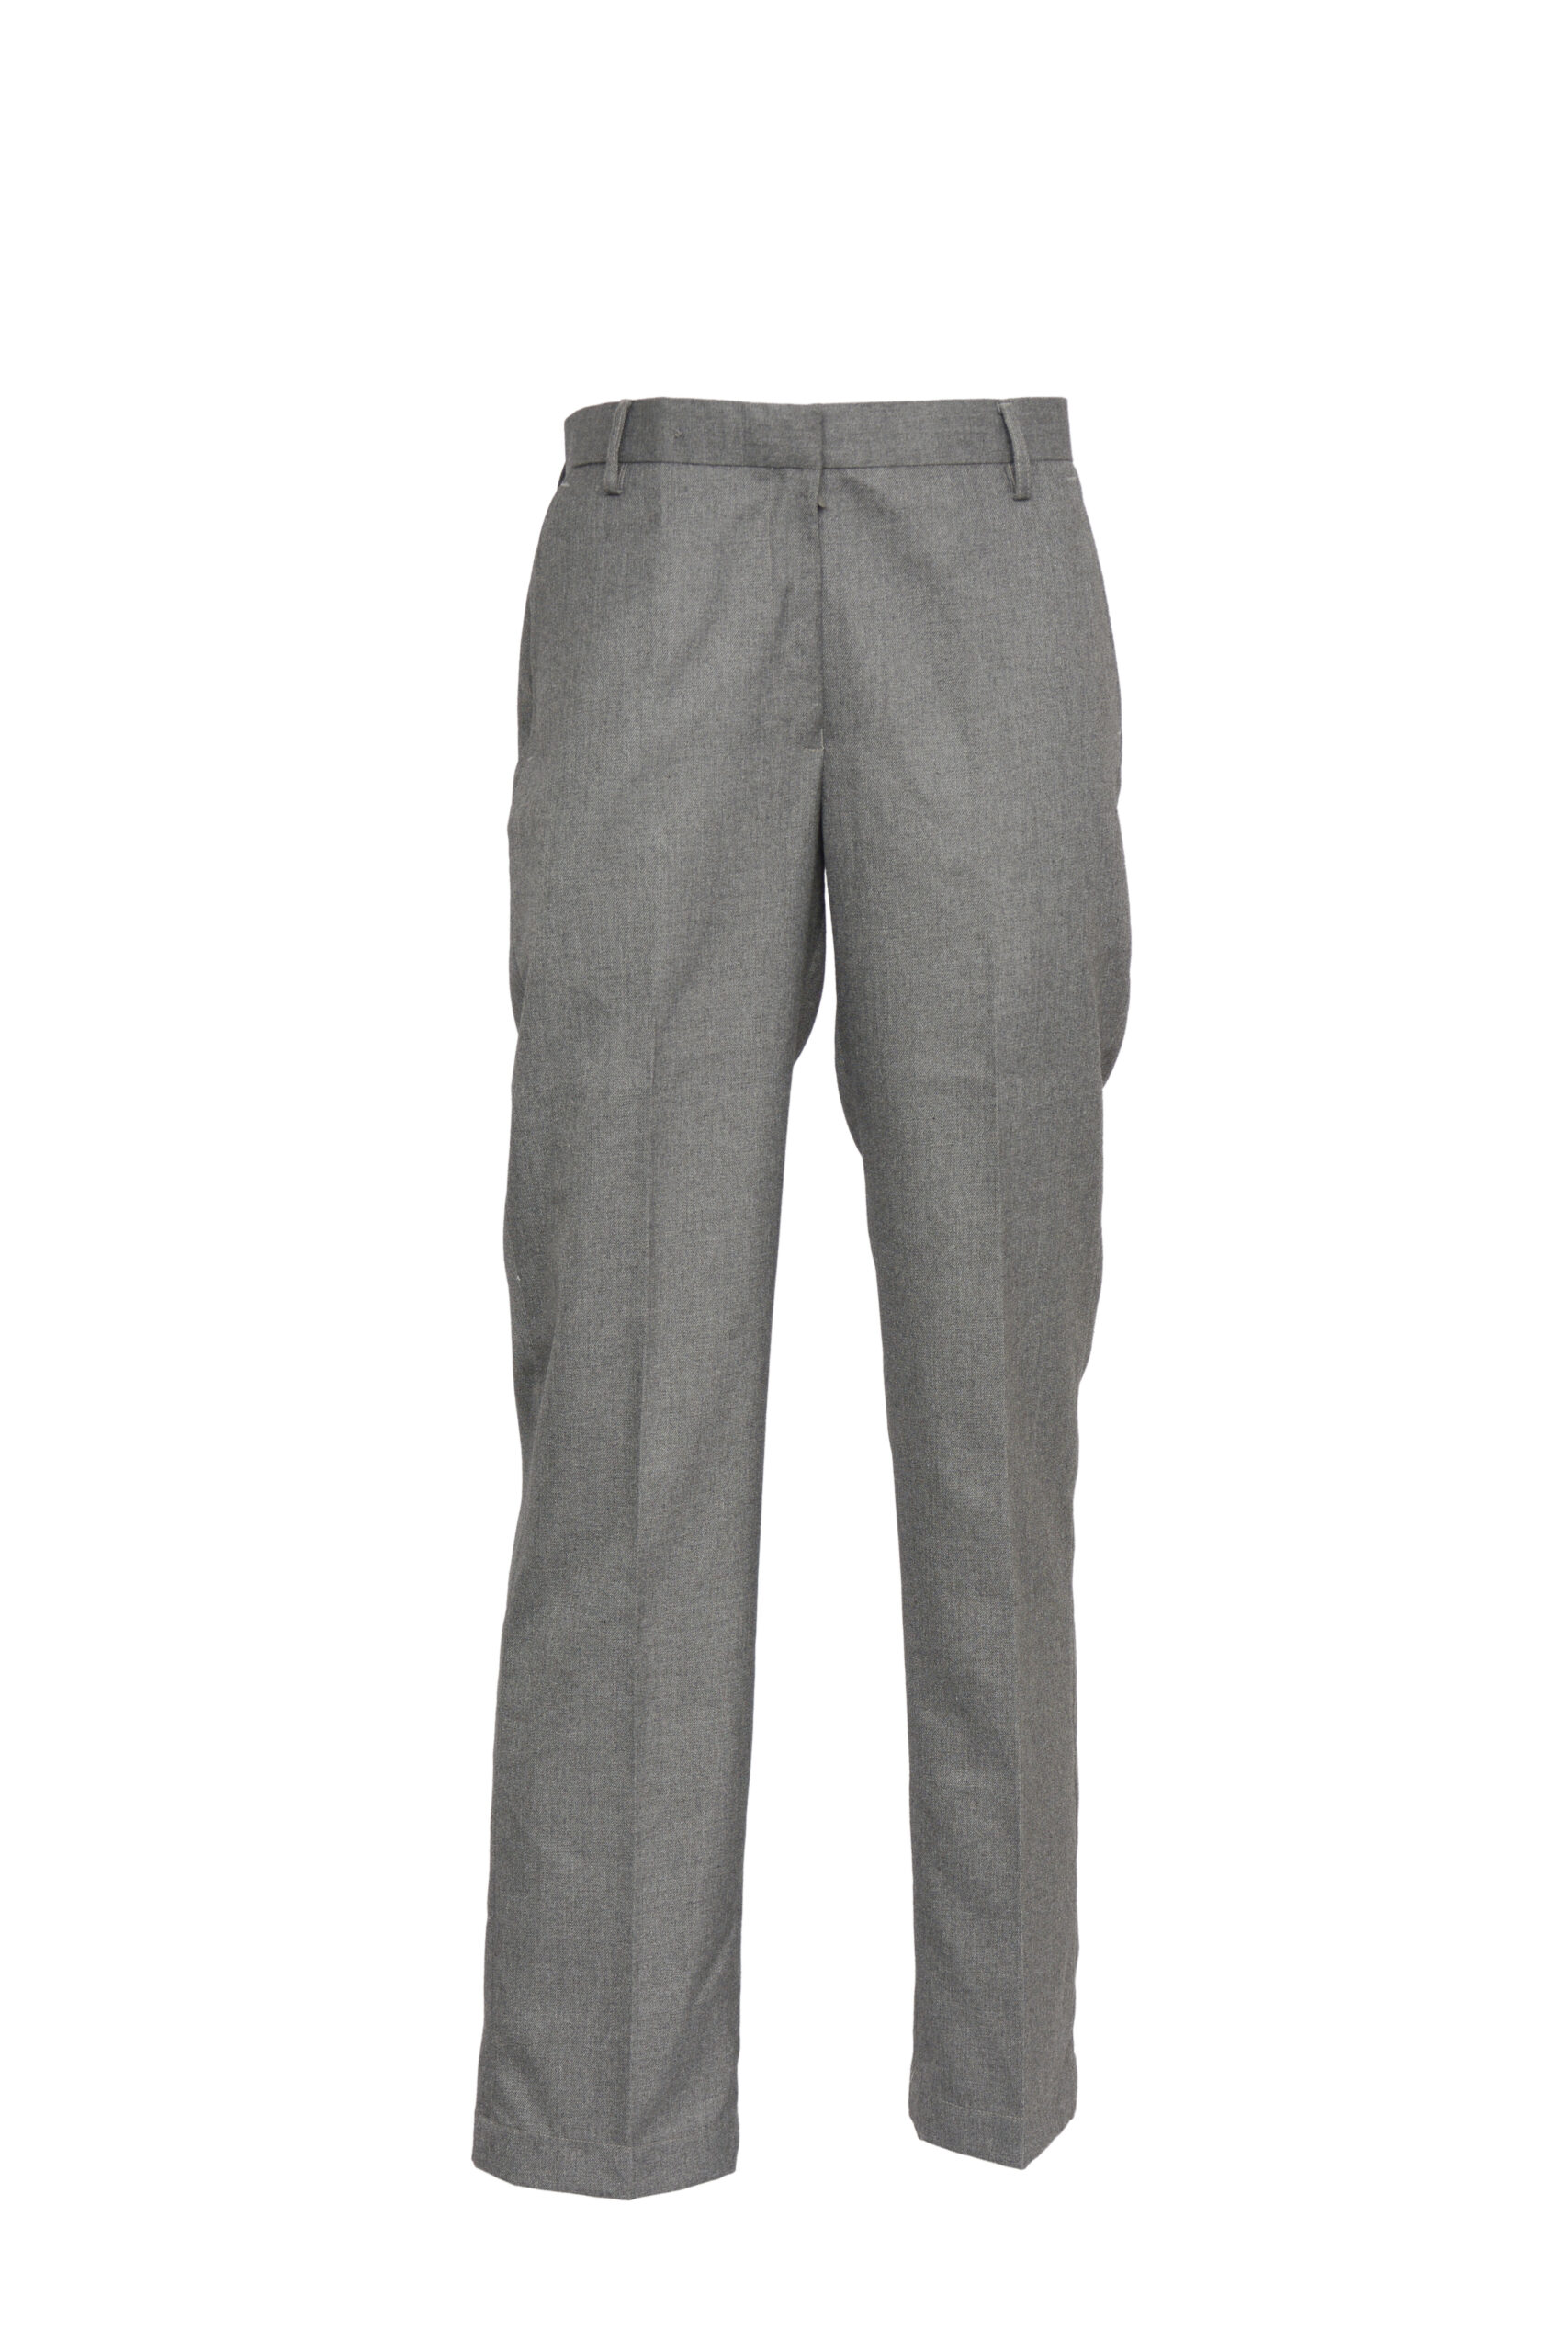 BSB 6th Form Girls’ Grey Trousers – AA Uniforms